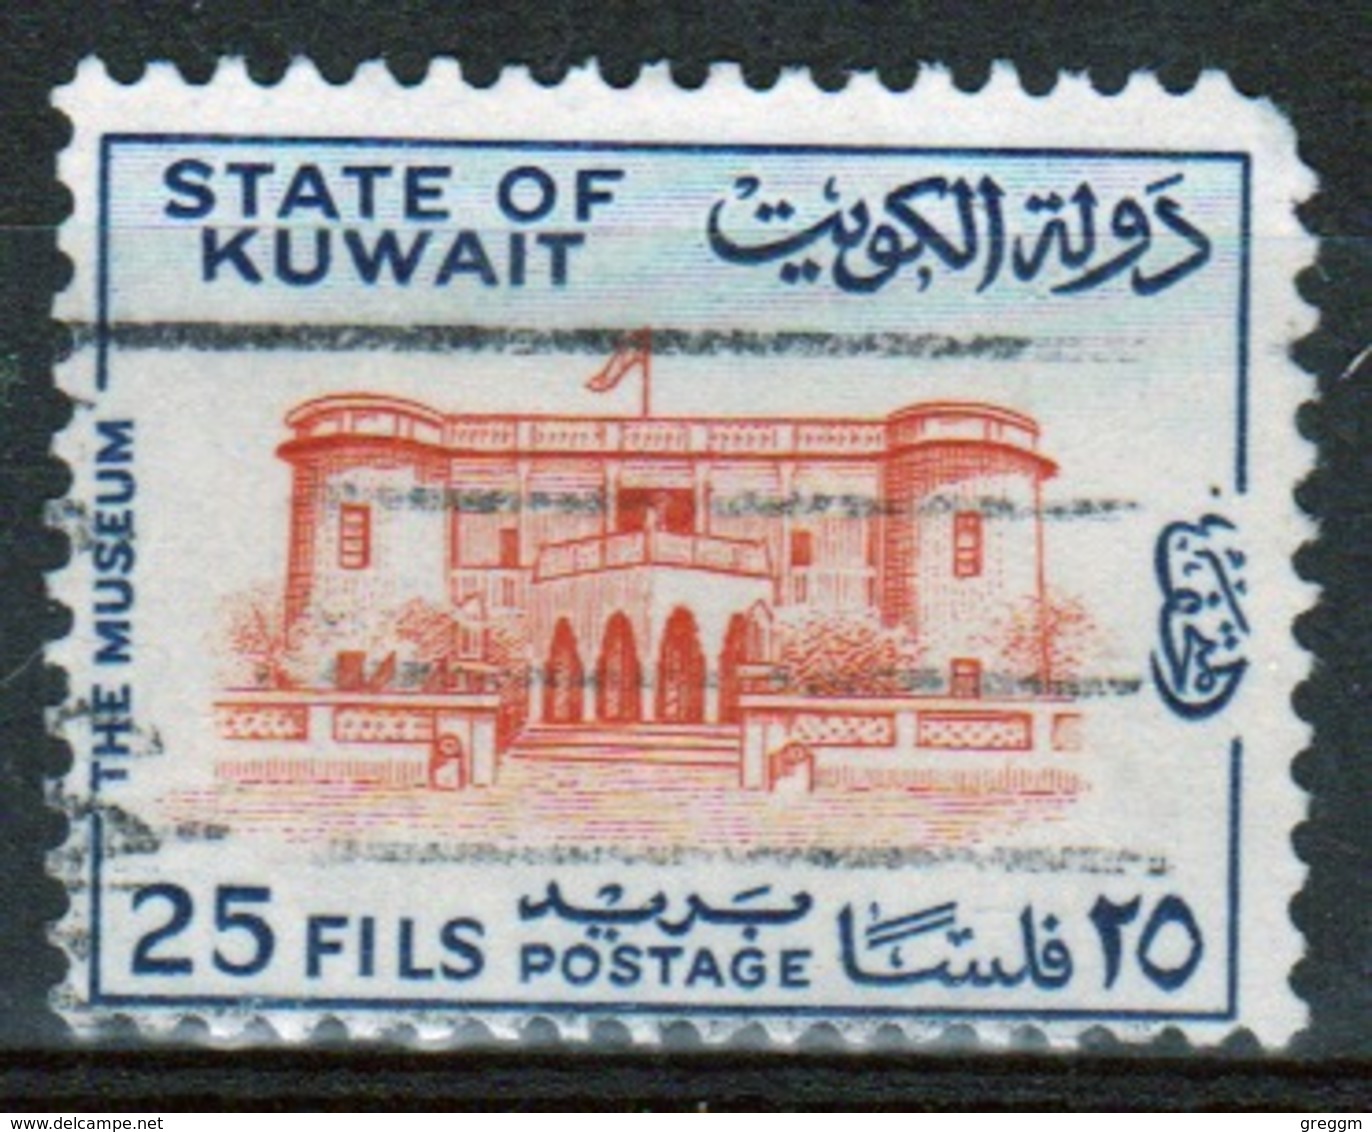 Kuwait 1968 Single Used 25 Fils Stamp From The National Museum Set.. - Koeweit